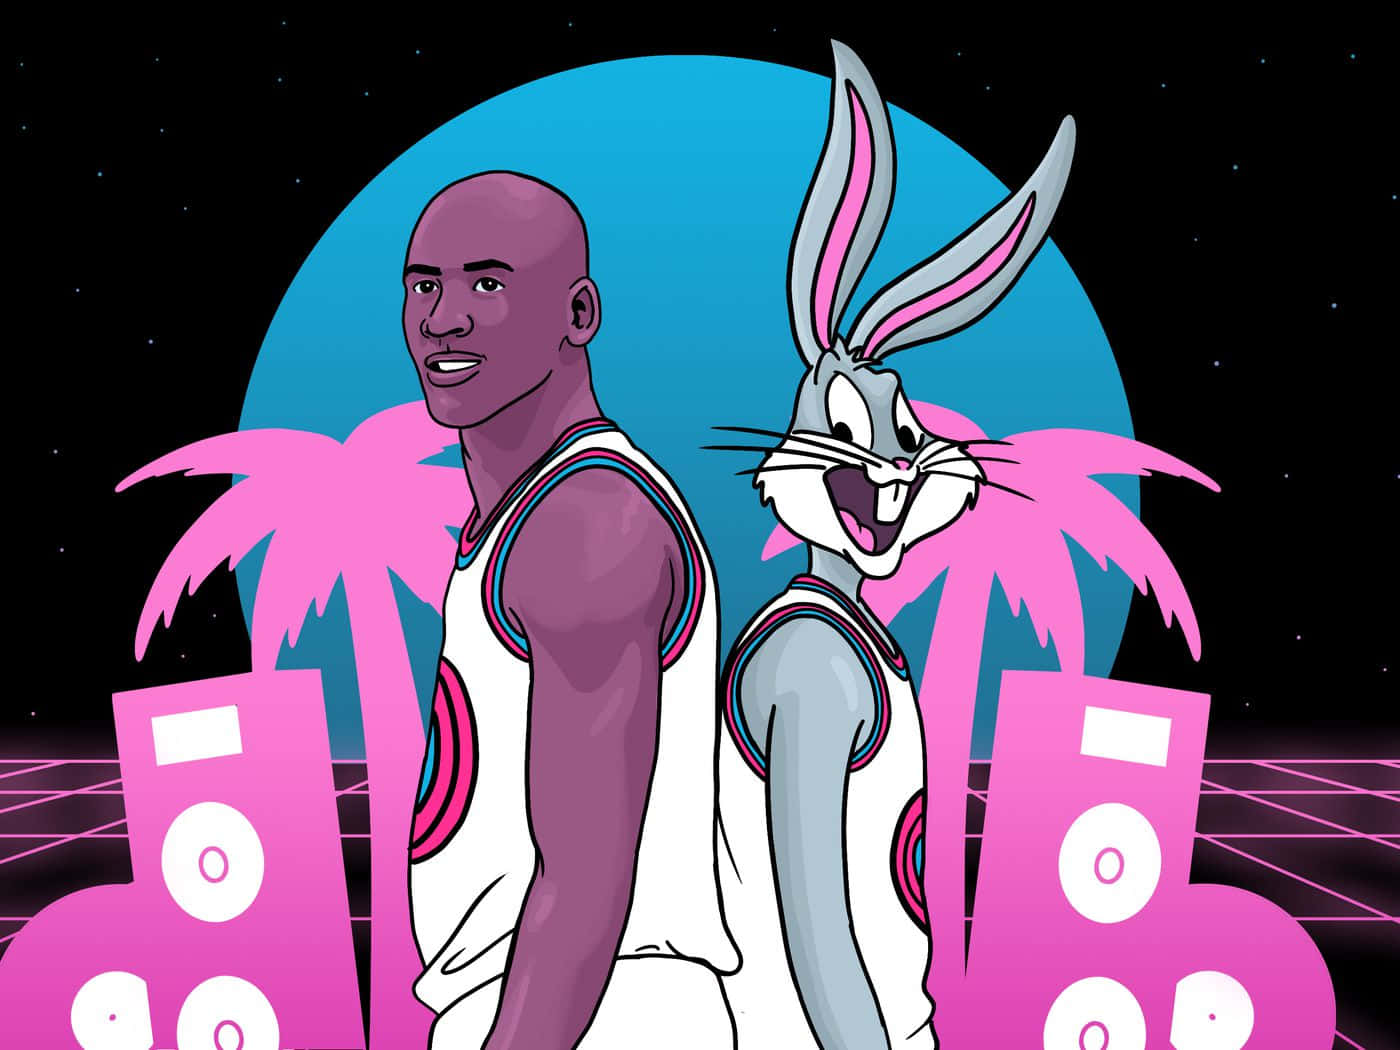 "Welcome to Space Jam!"